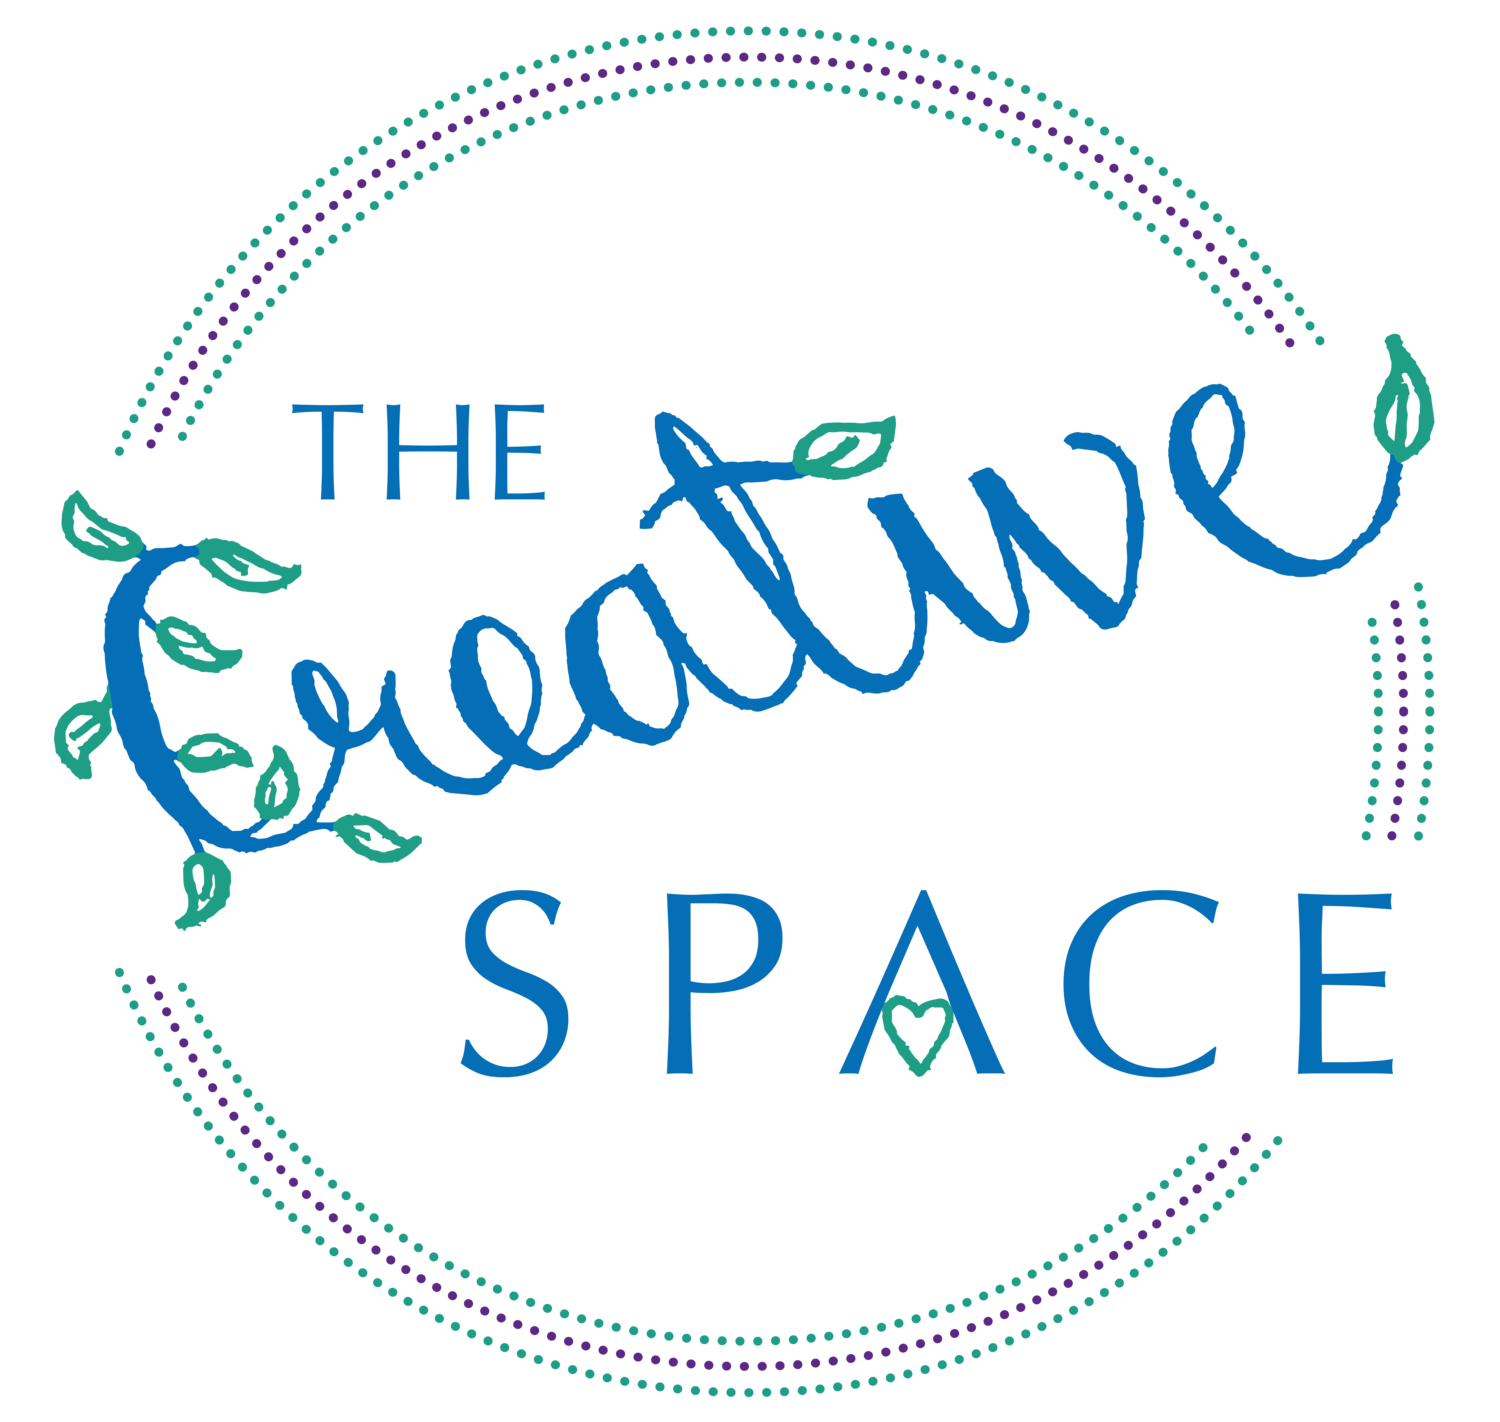 The Creative Space